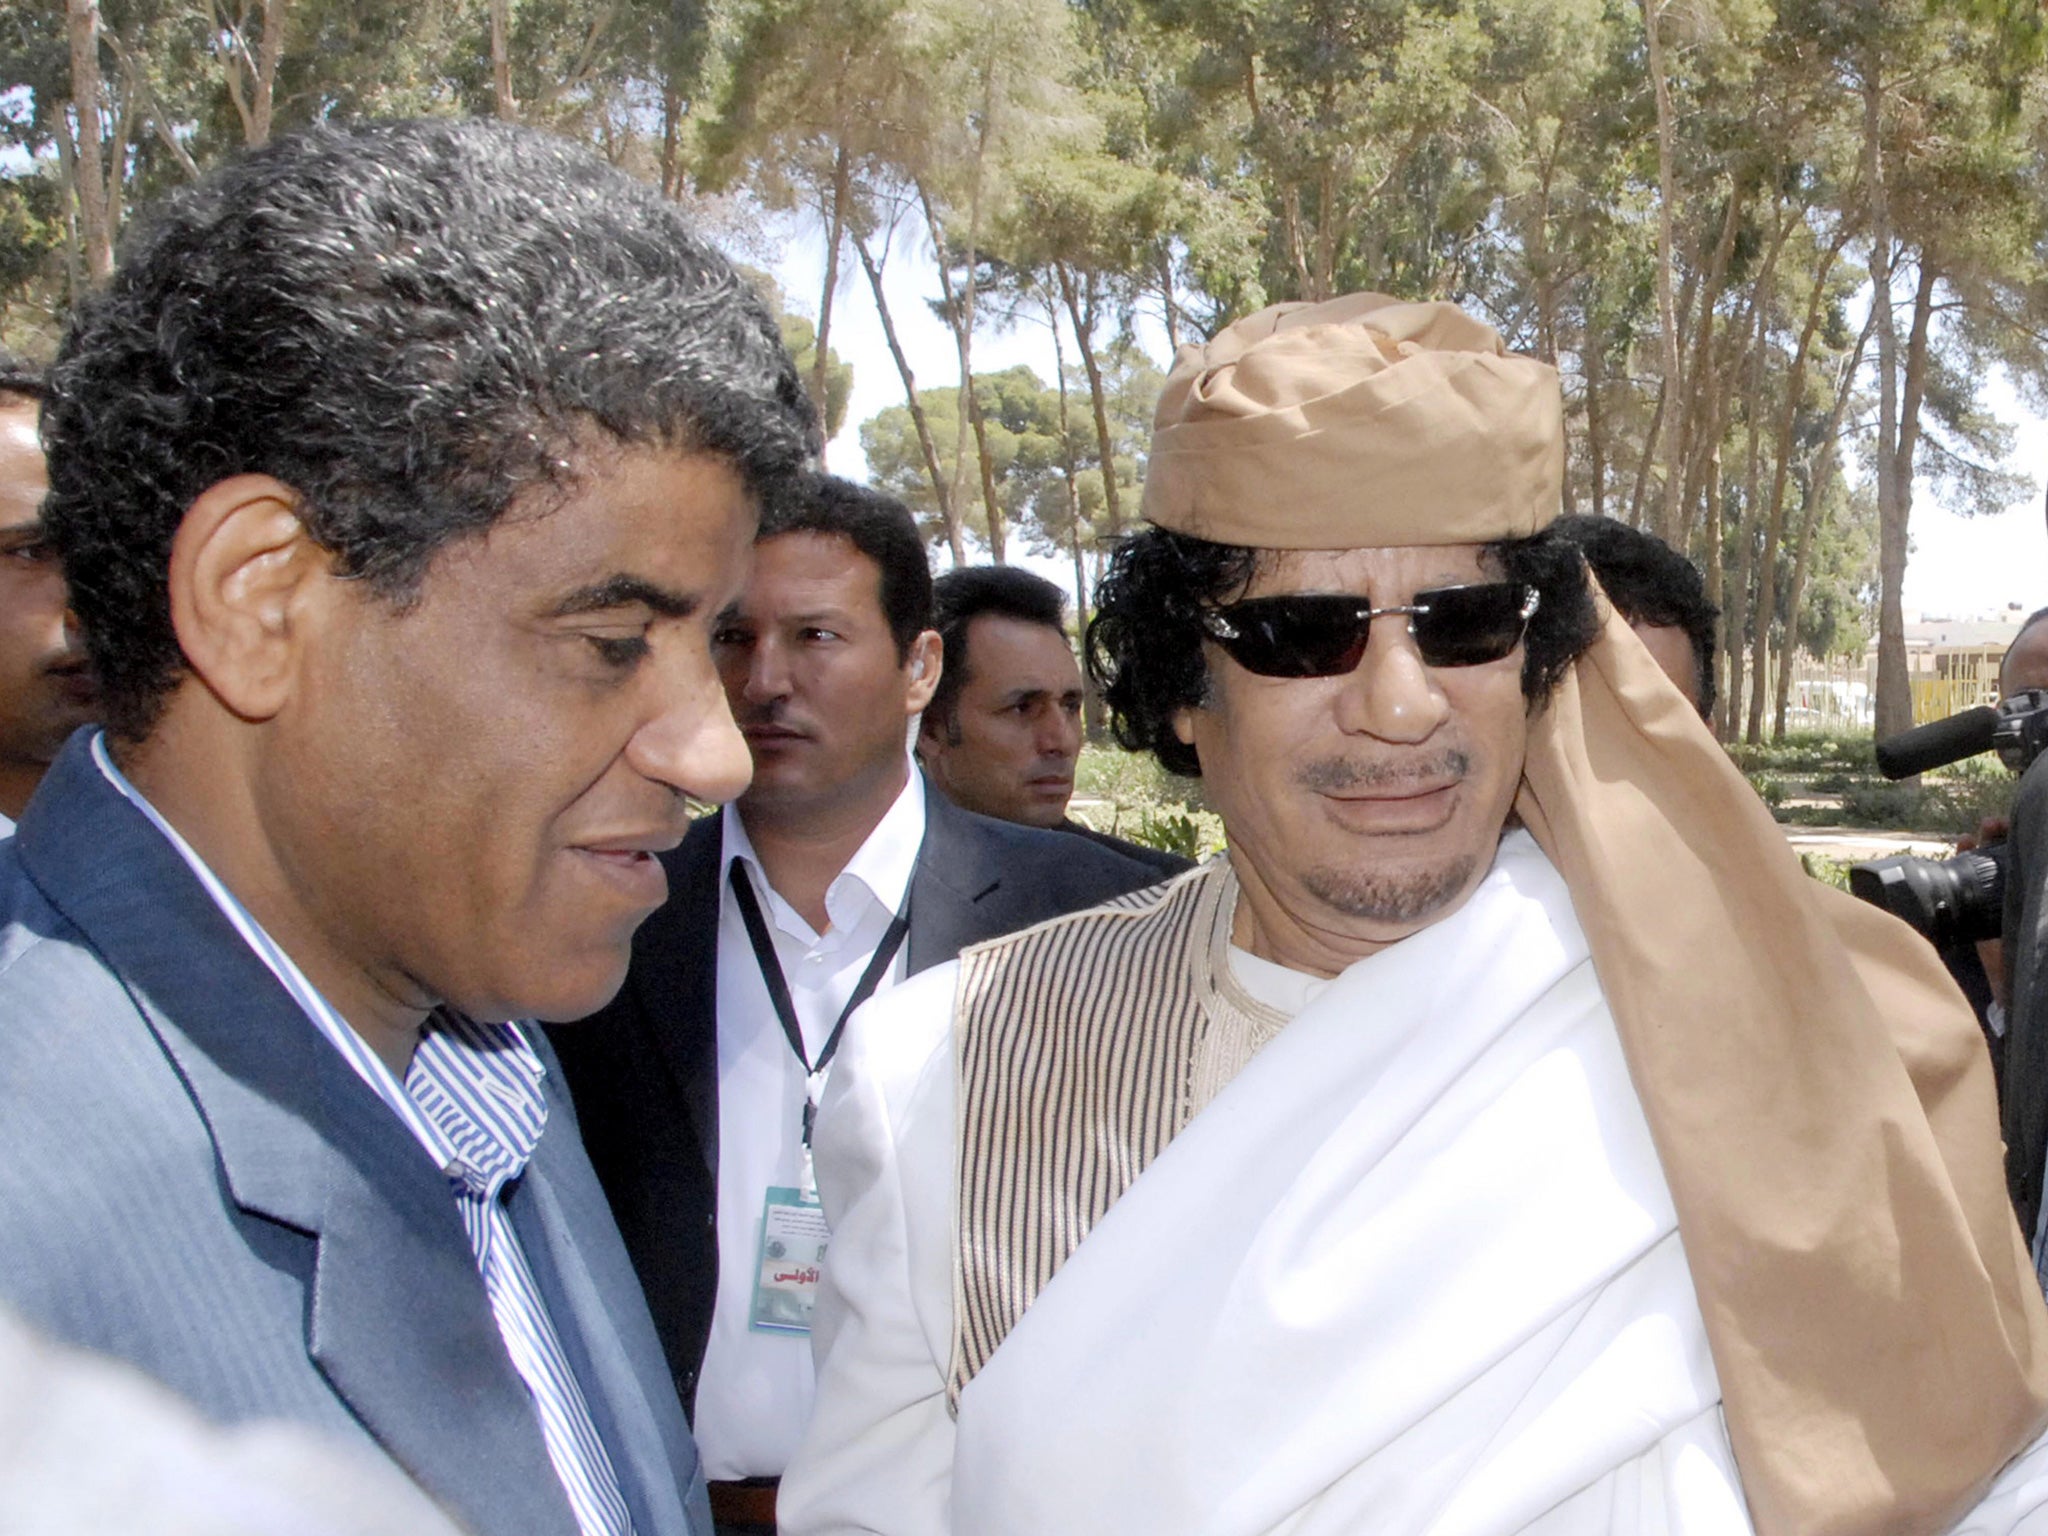 It alleges that Mr Marino and a fellow director took advantage of the 2011 Libyan uprising which led to the overthrow of Libya’s leader Muammar Gaddafi.